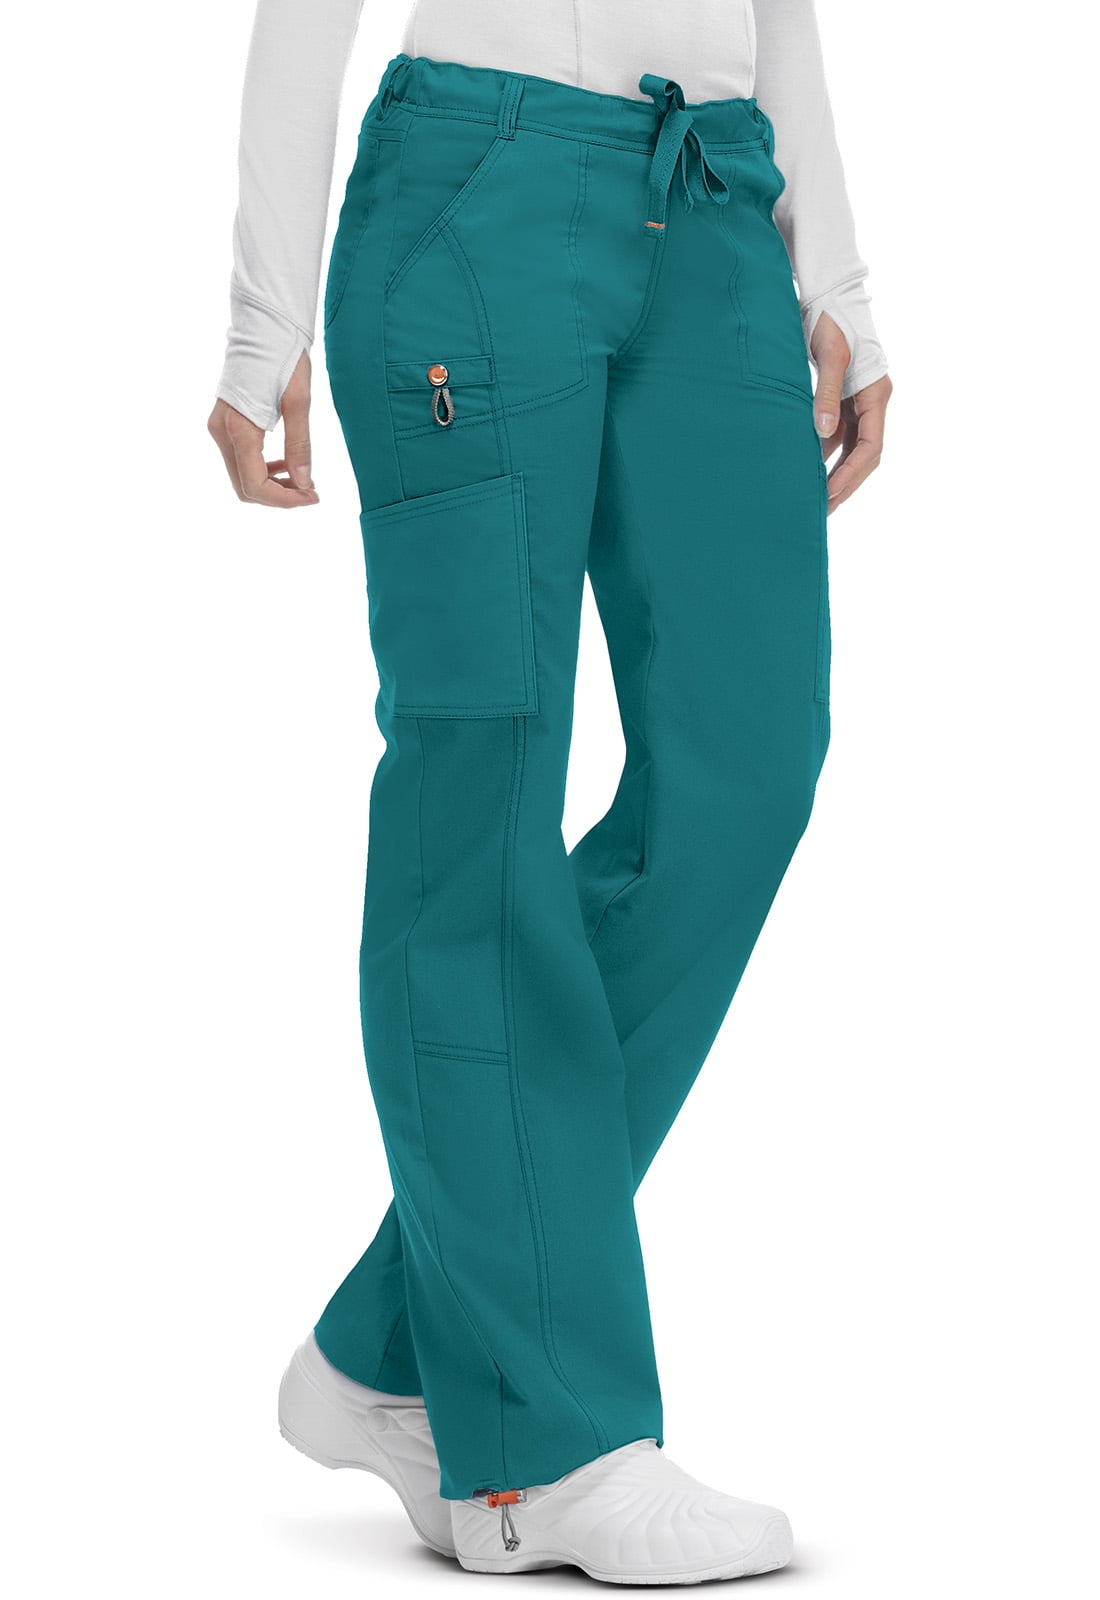 Scrubs Code Happy Low Rise Drawstring Pant 46000A TLCH Teal Free Shipping 